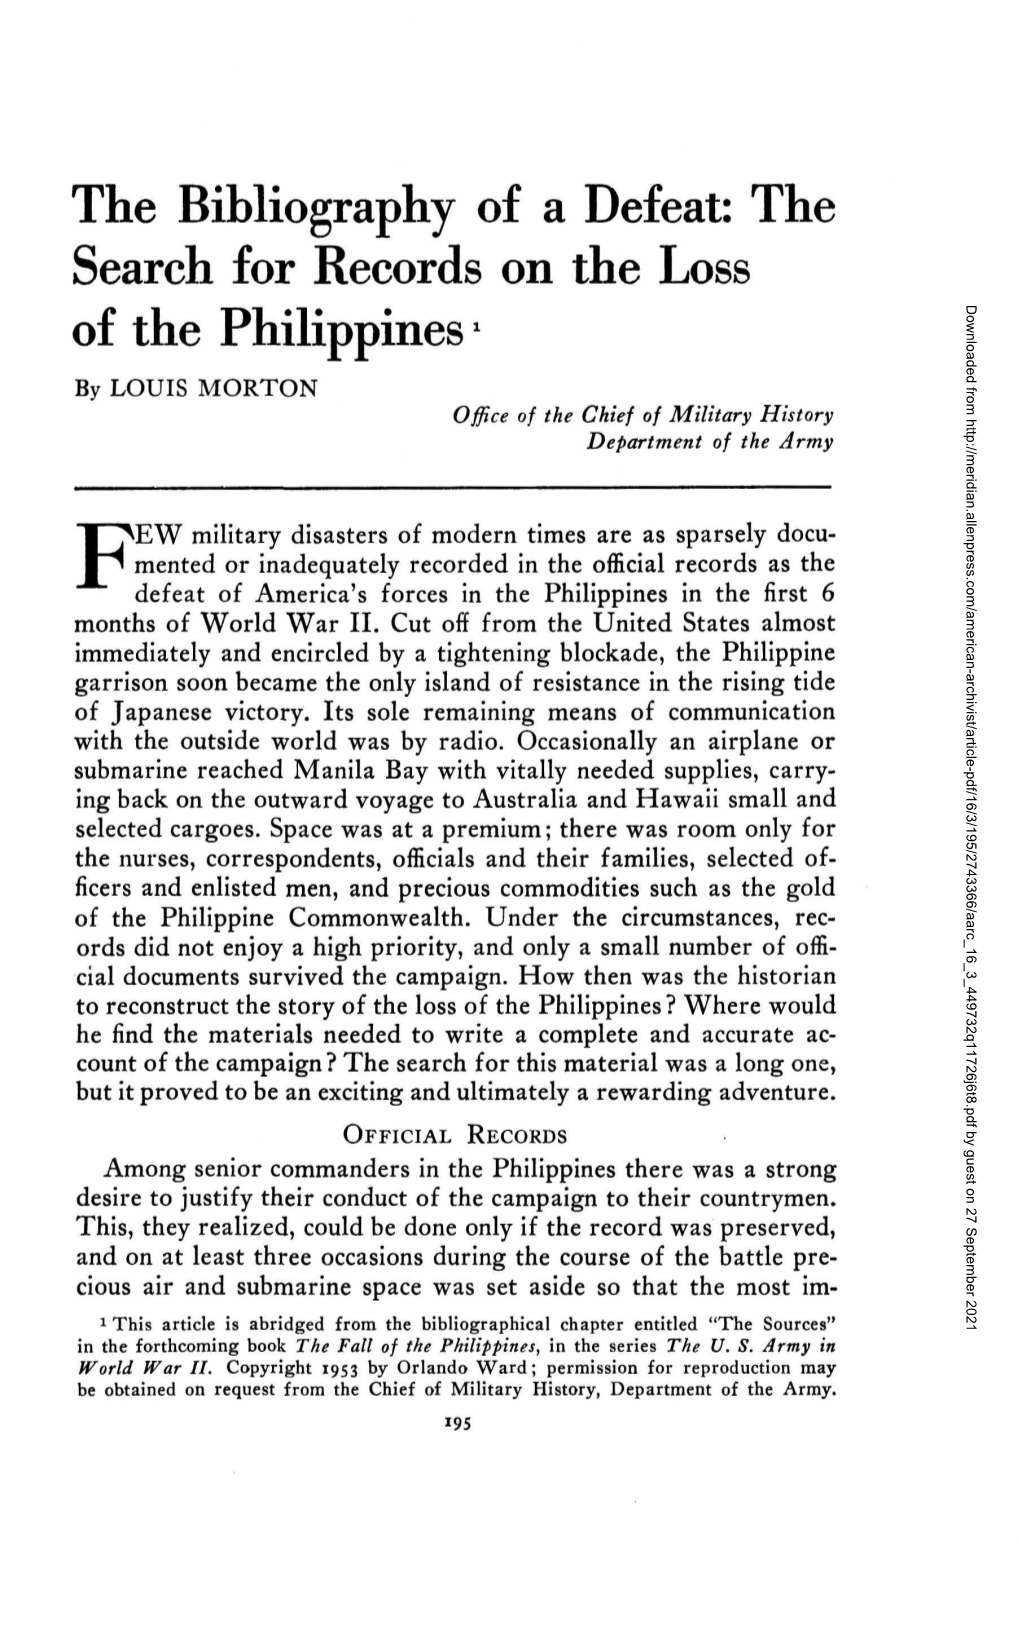 The Search for Records on the Loss of the Philippines1